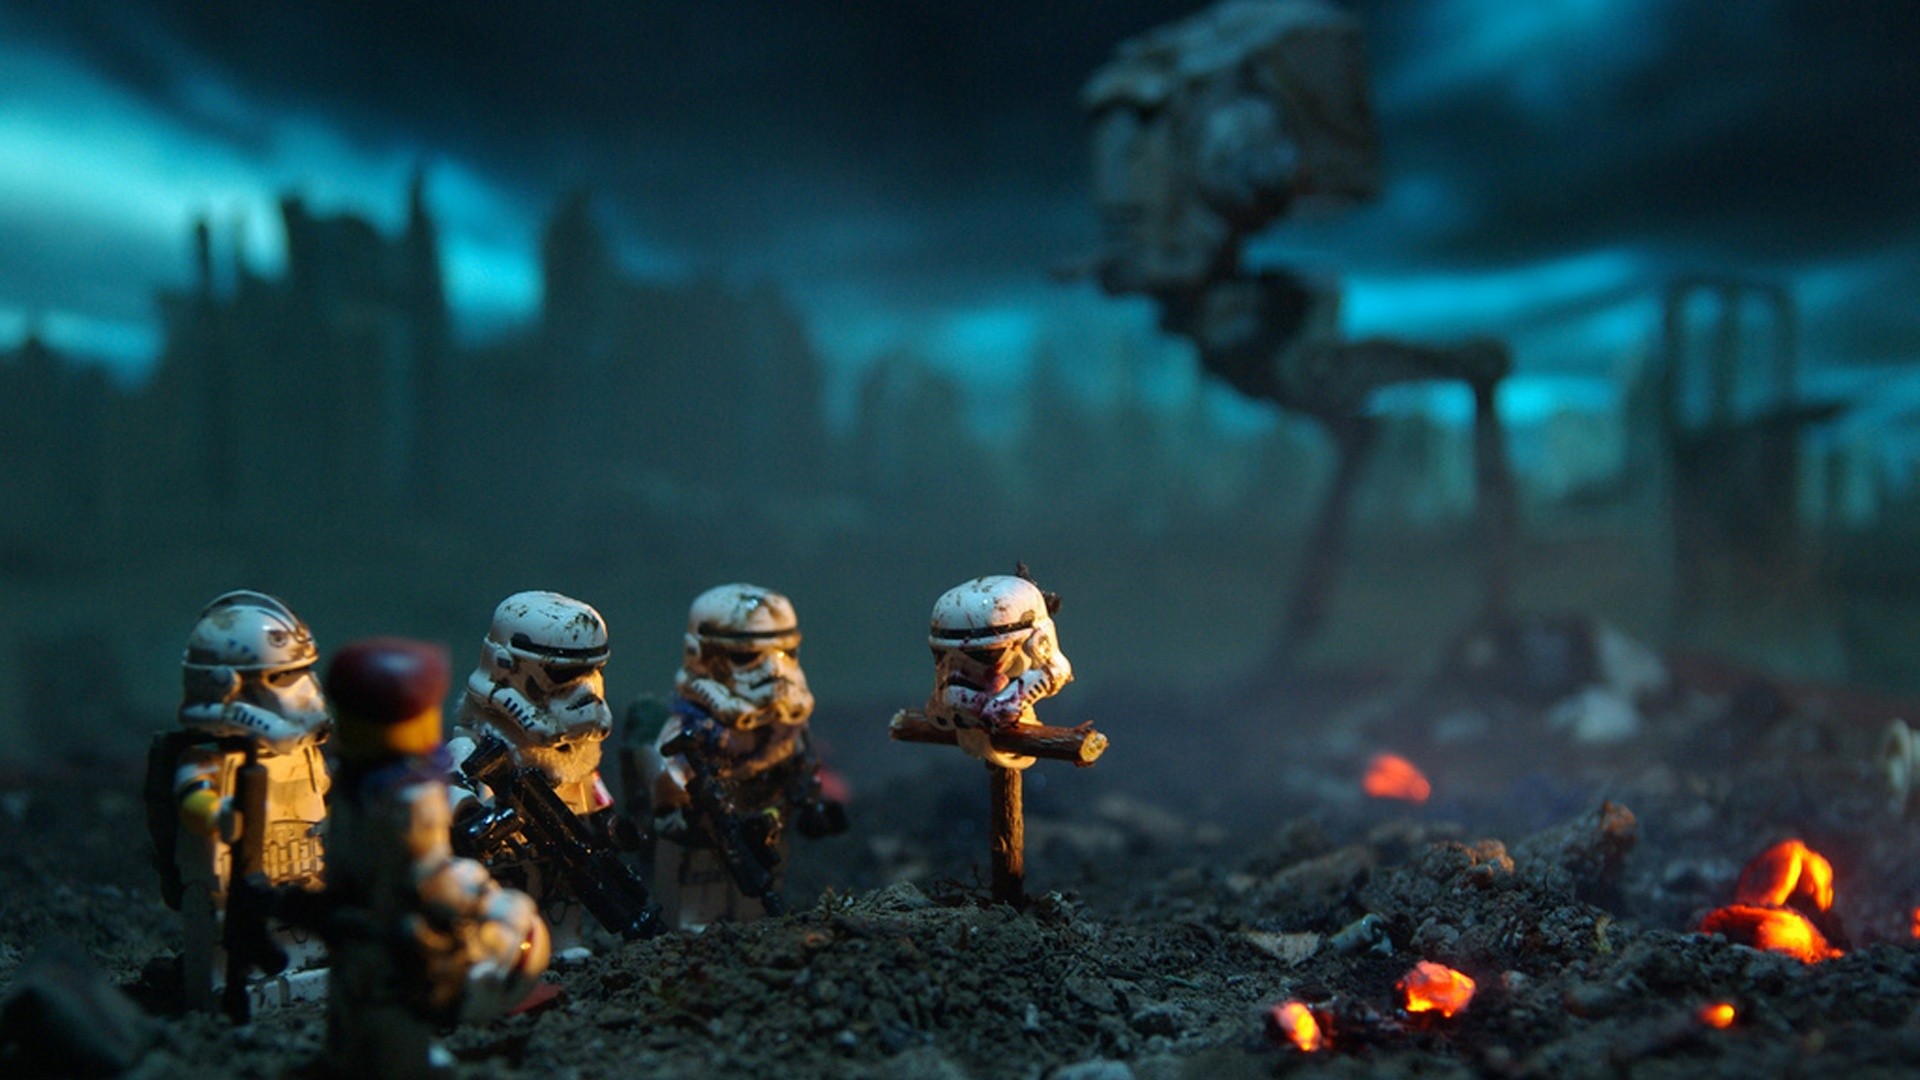 Star Wars Lego Cool Pictures HD Wallpaper of Lego   hdwallpaper2013 1920x1080